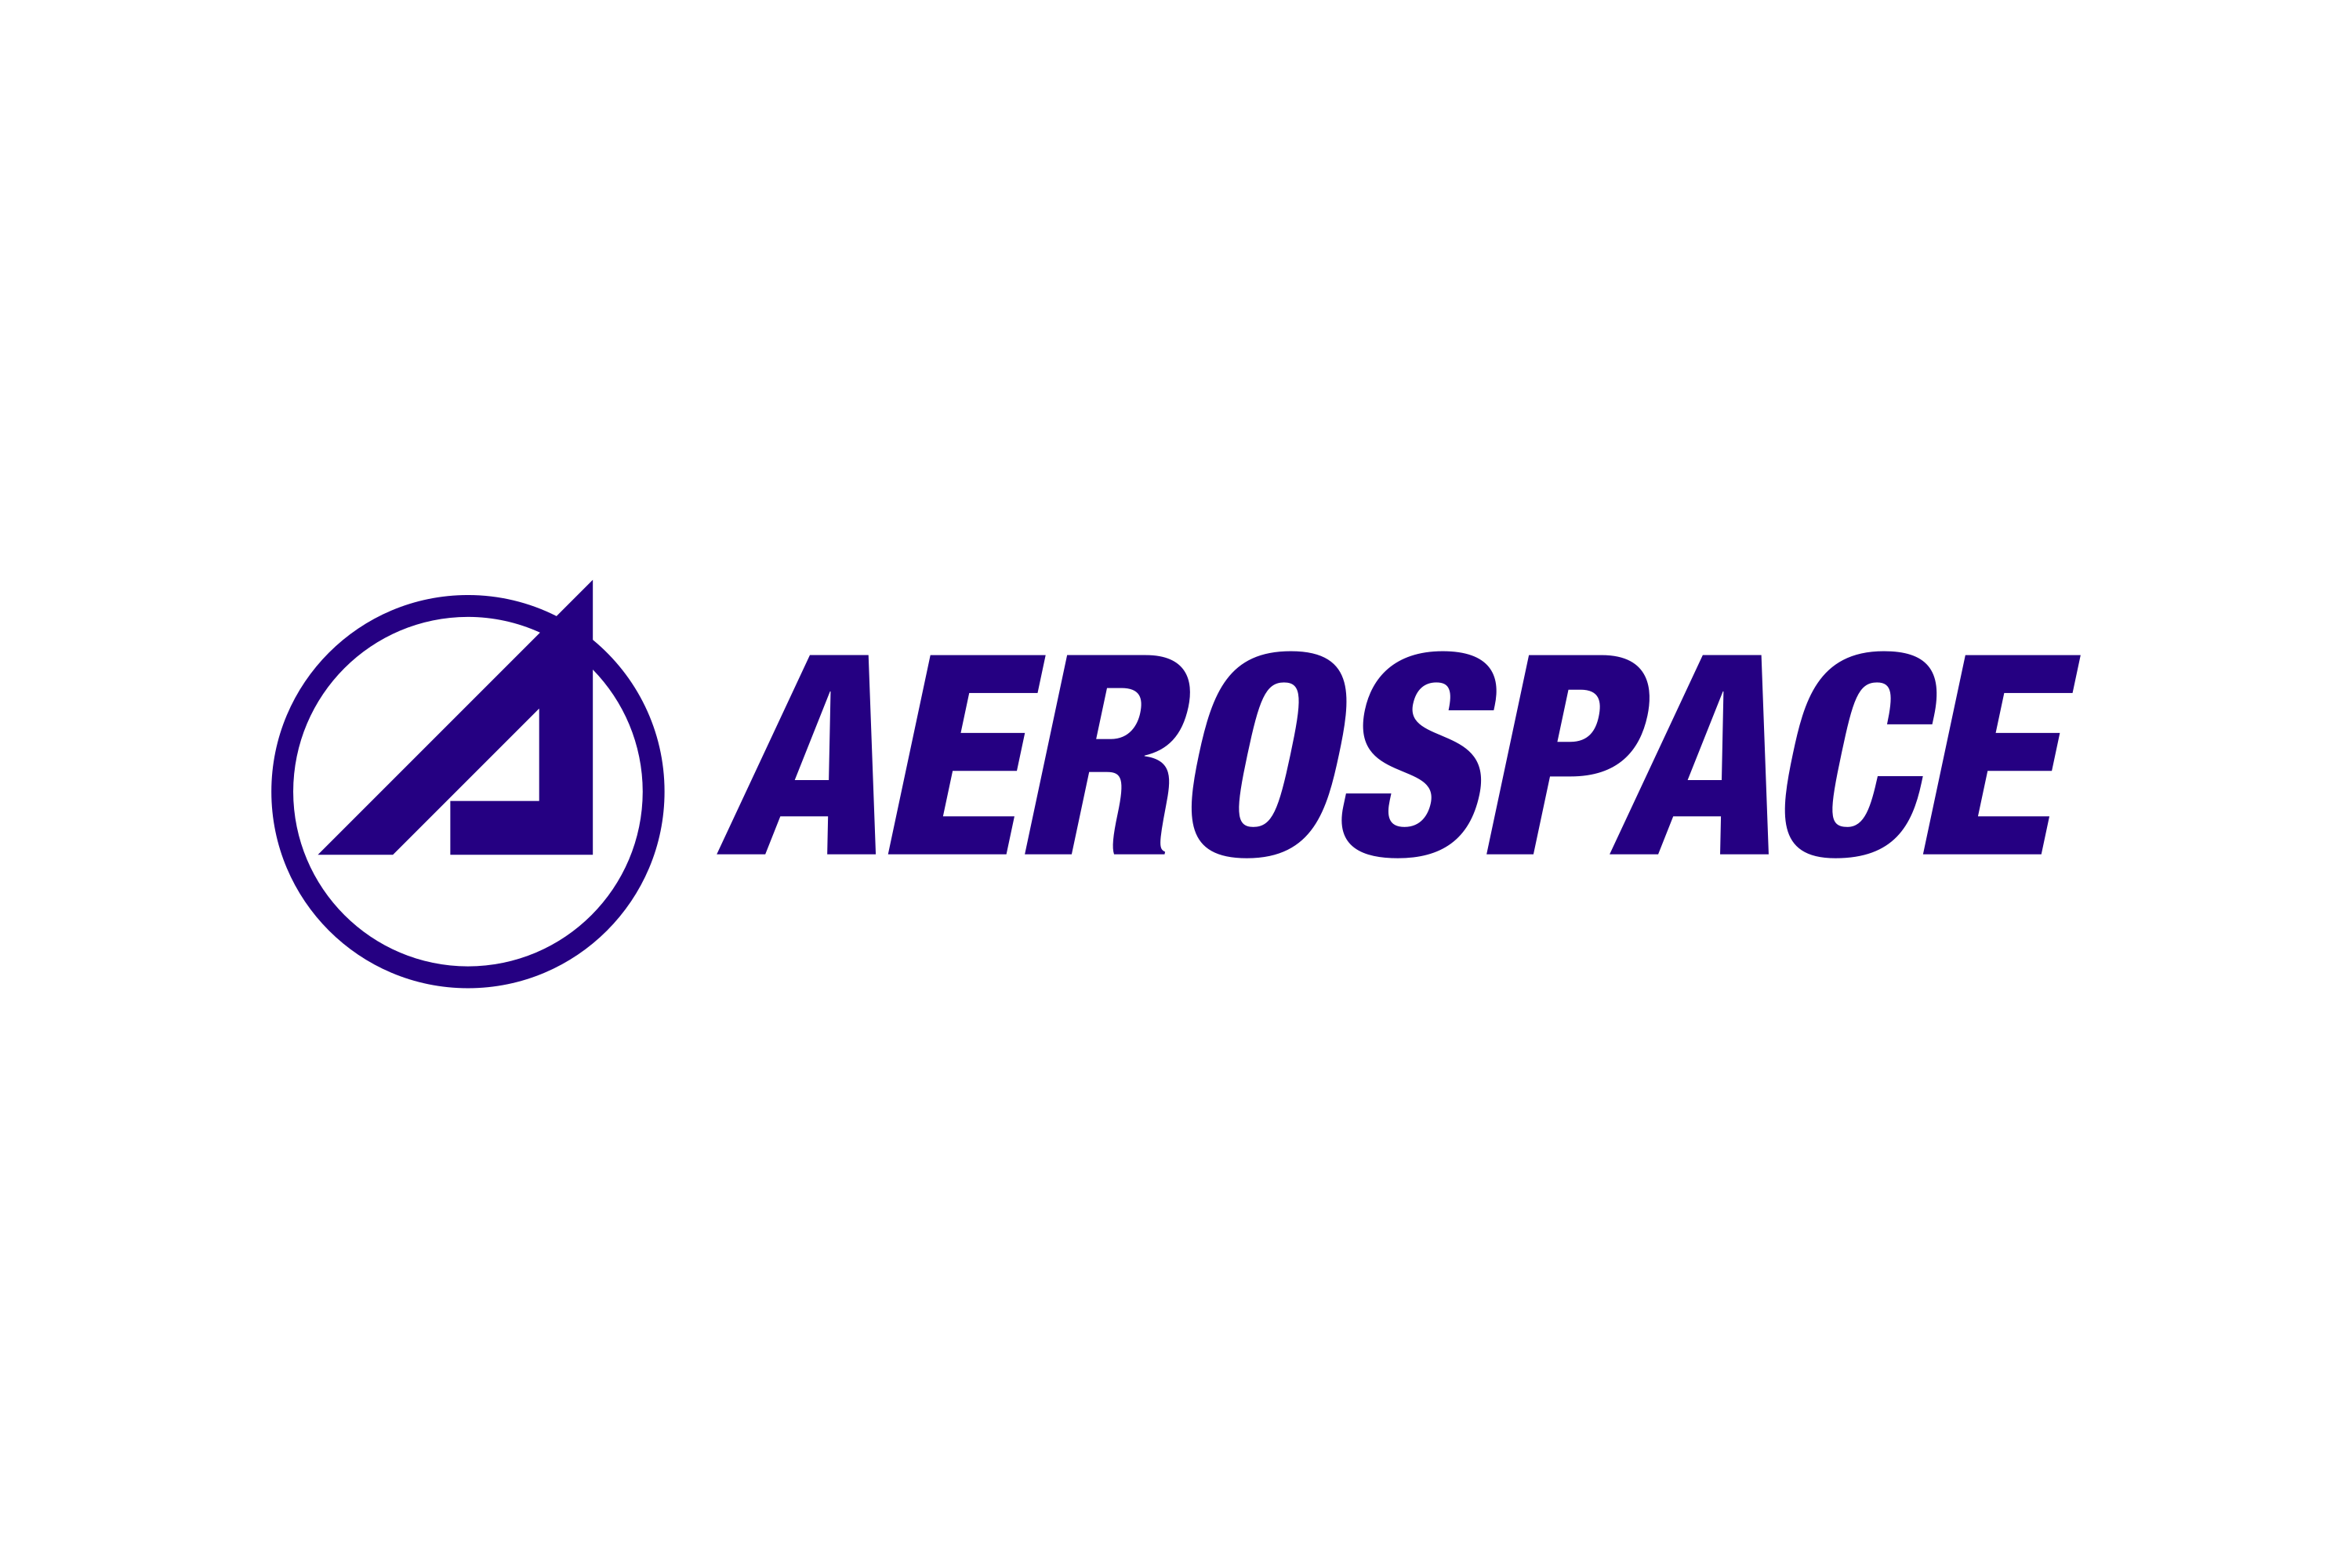 Download The Aerospace Corporation Logo in SVG Vector or PNG File